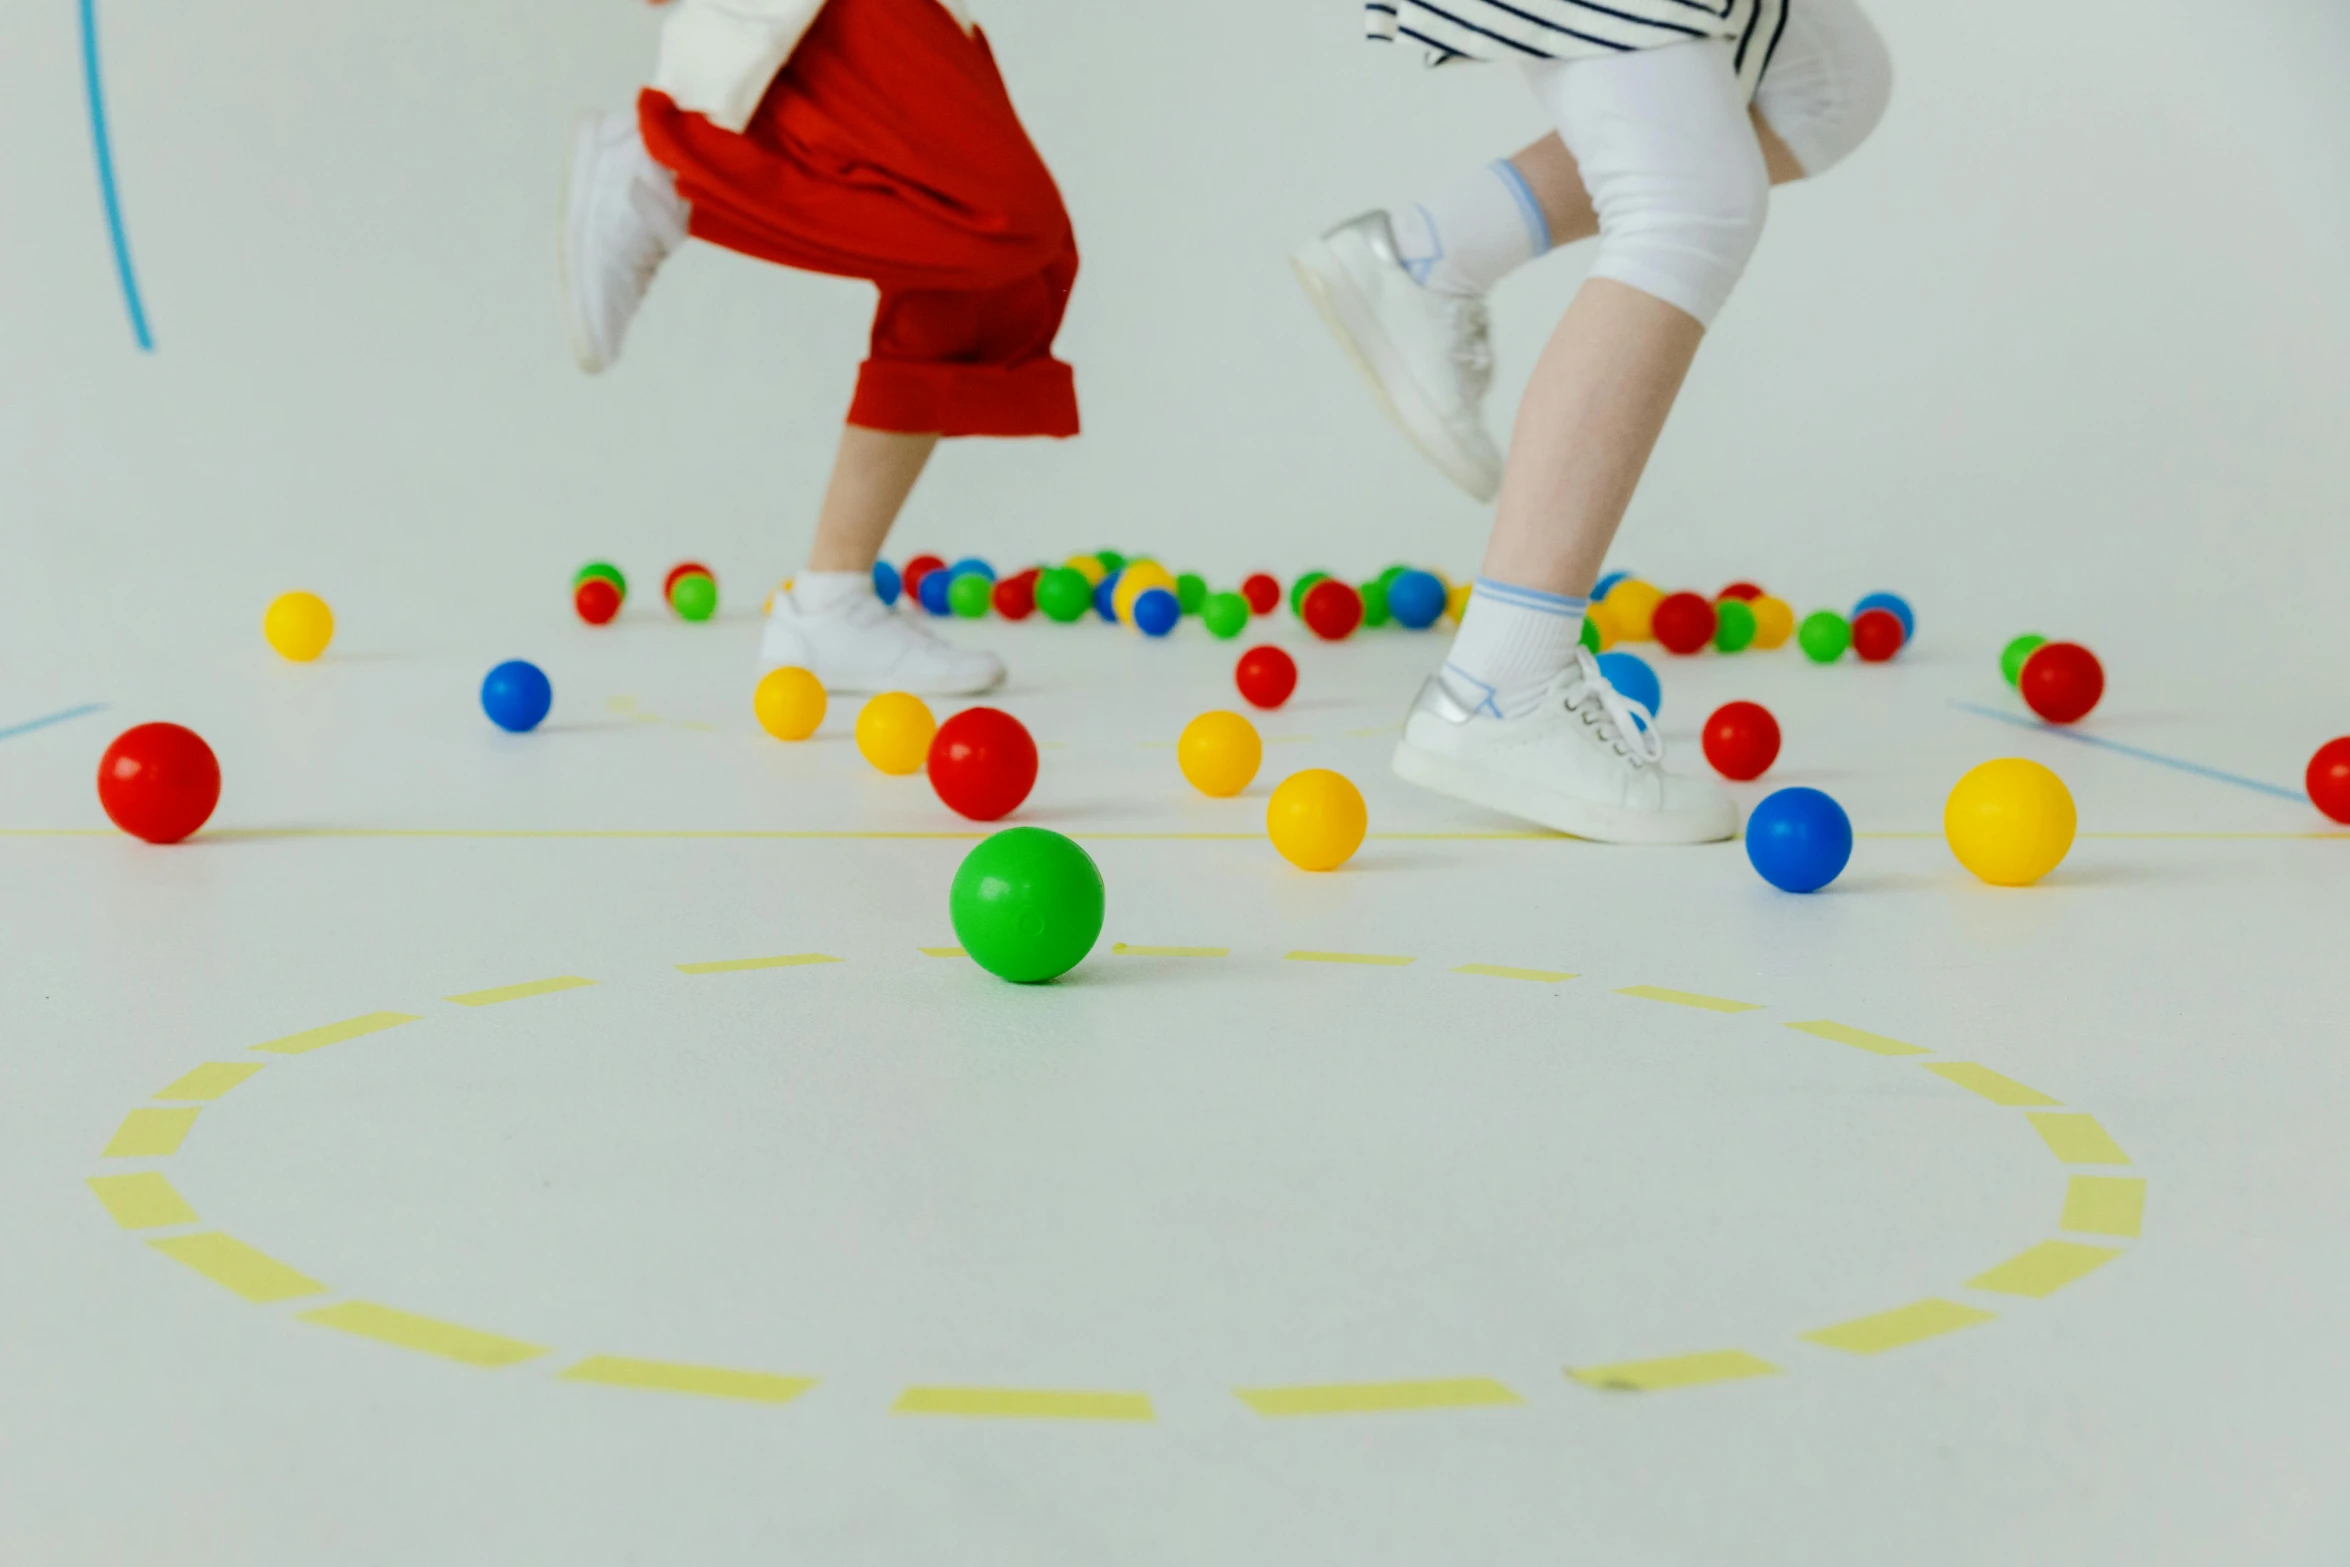 two children are playing on a floor with balls